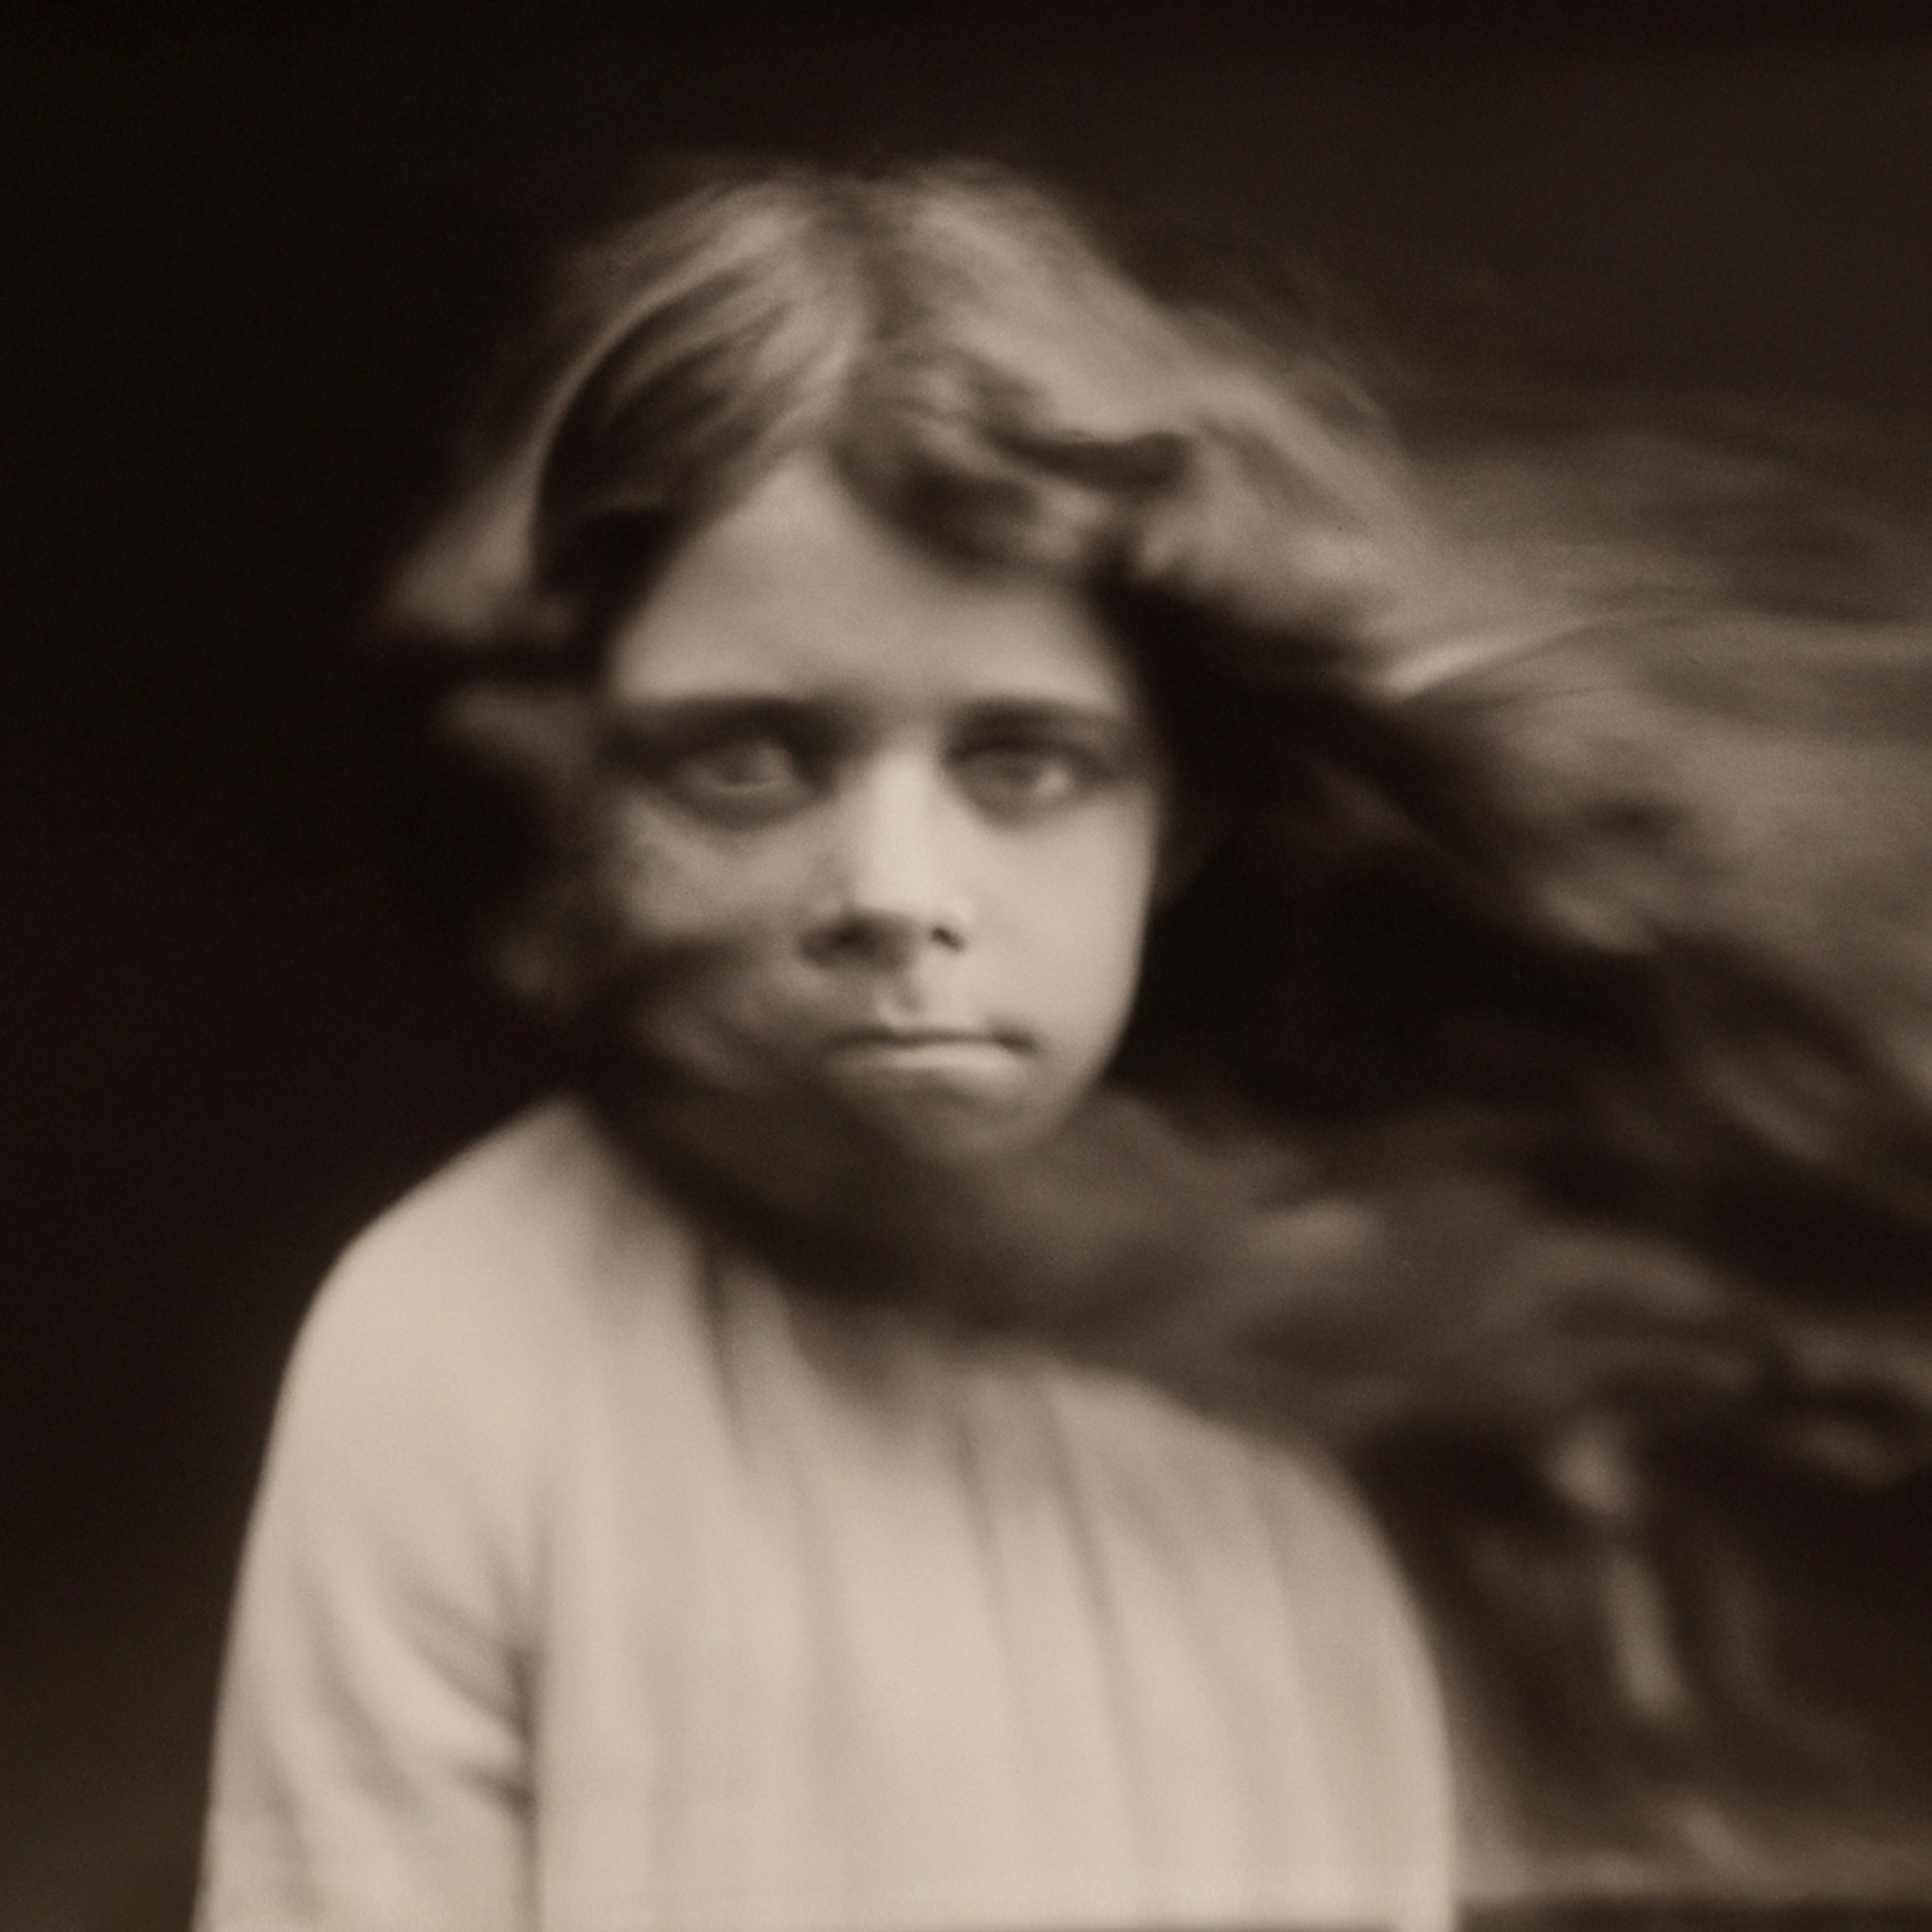 Sepia toned image of a young girl with hair blowing in the wind